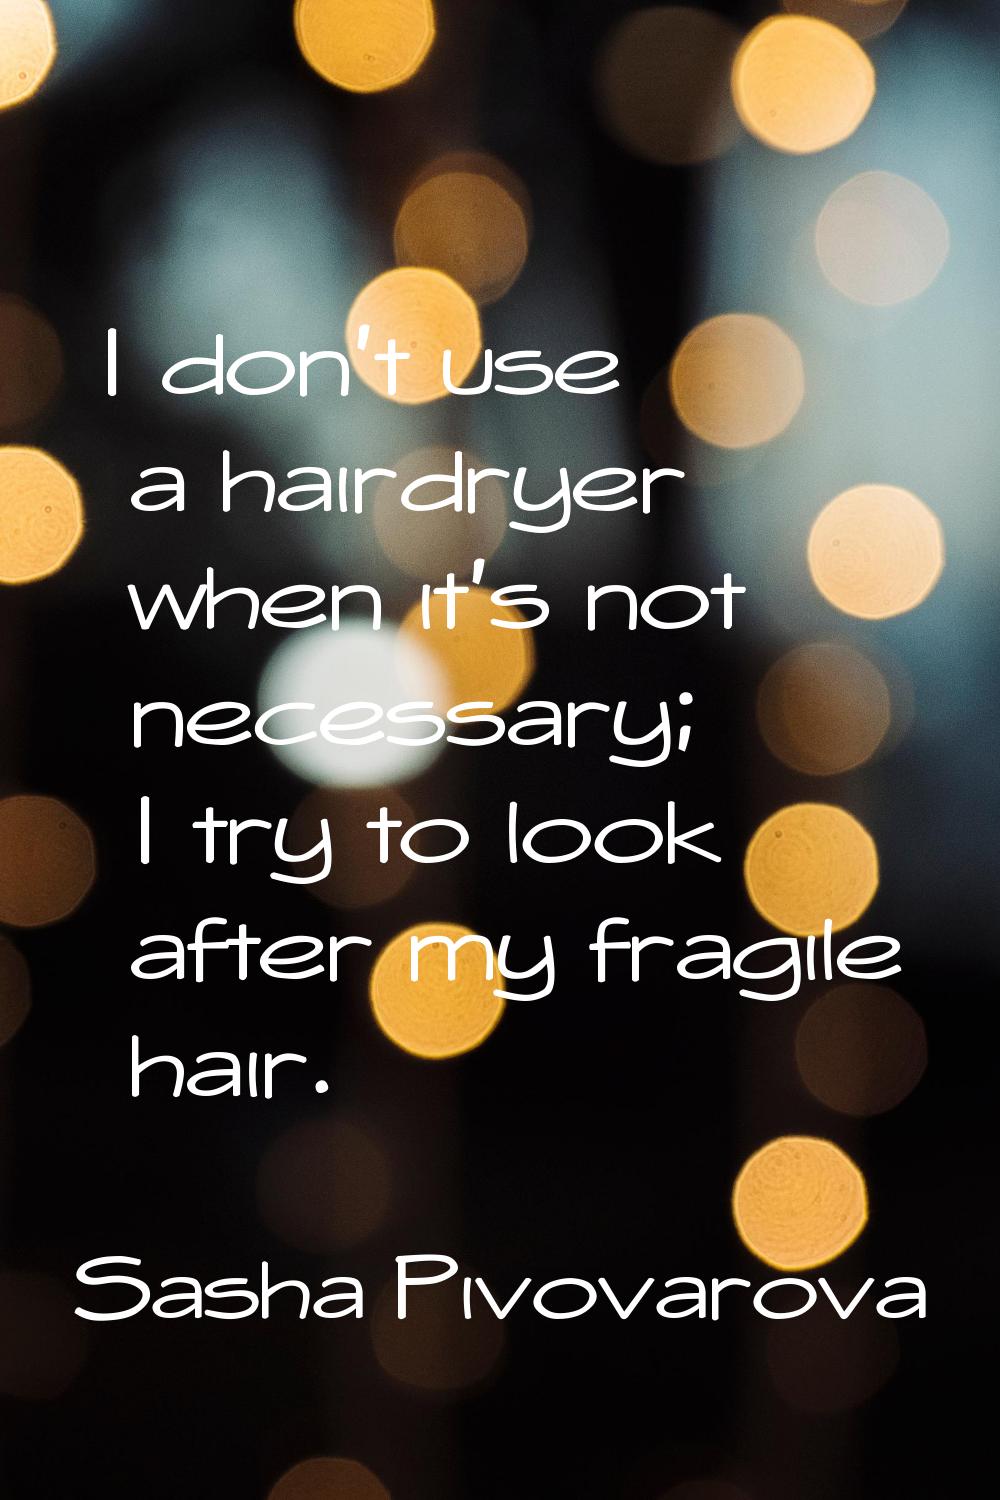 I don't use a hairdryer when it's not necessary; I try to look after my fragile hair.